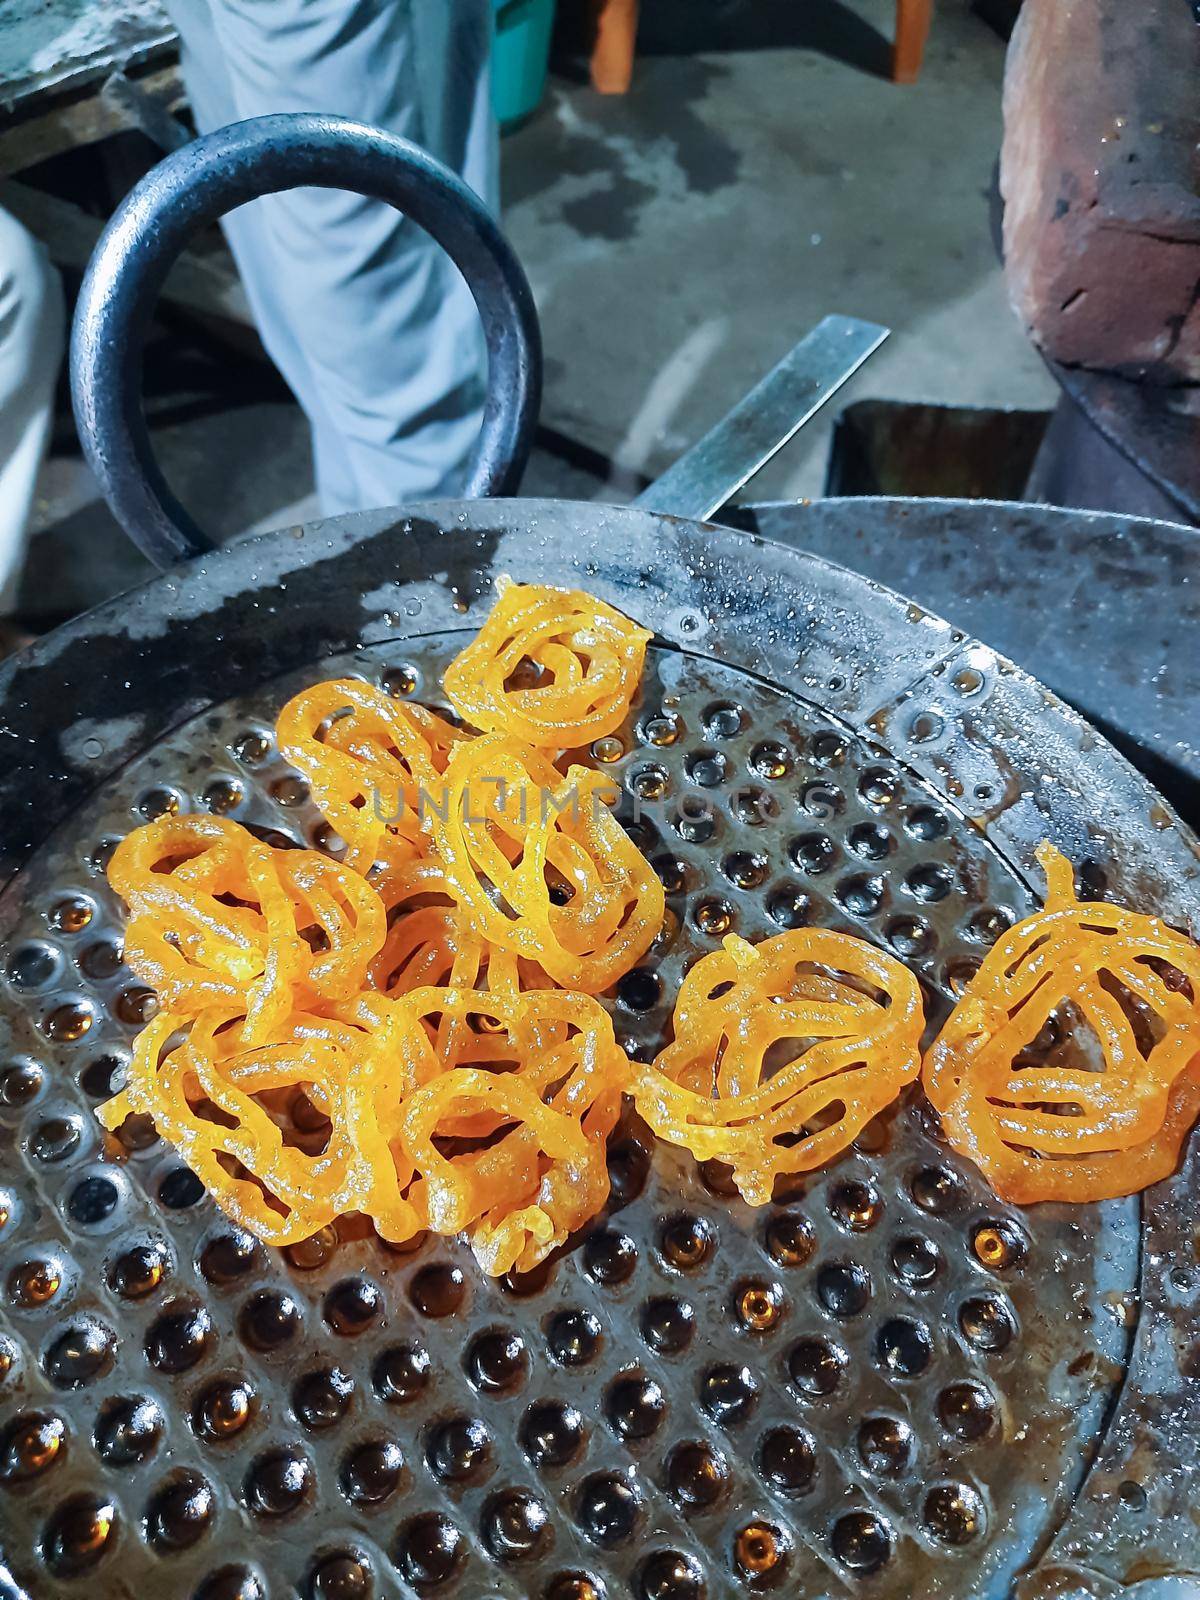 Jalebi is a famous indian sweet. This shows how jalebi are 1st fried in oil